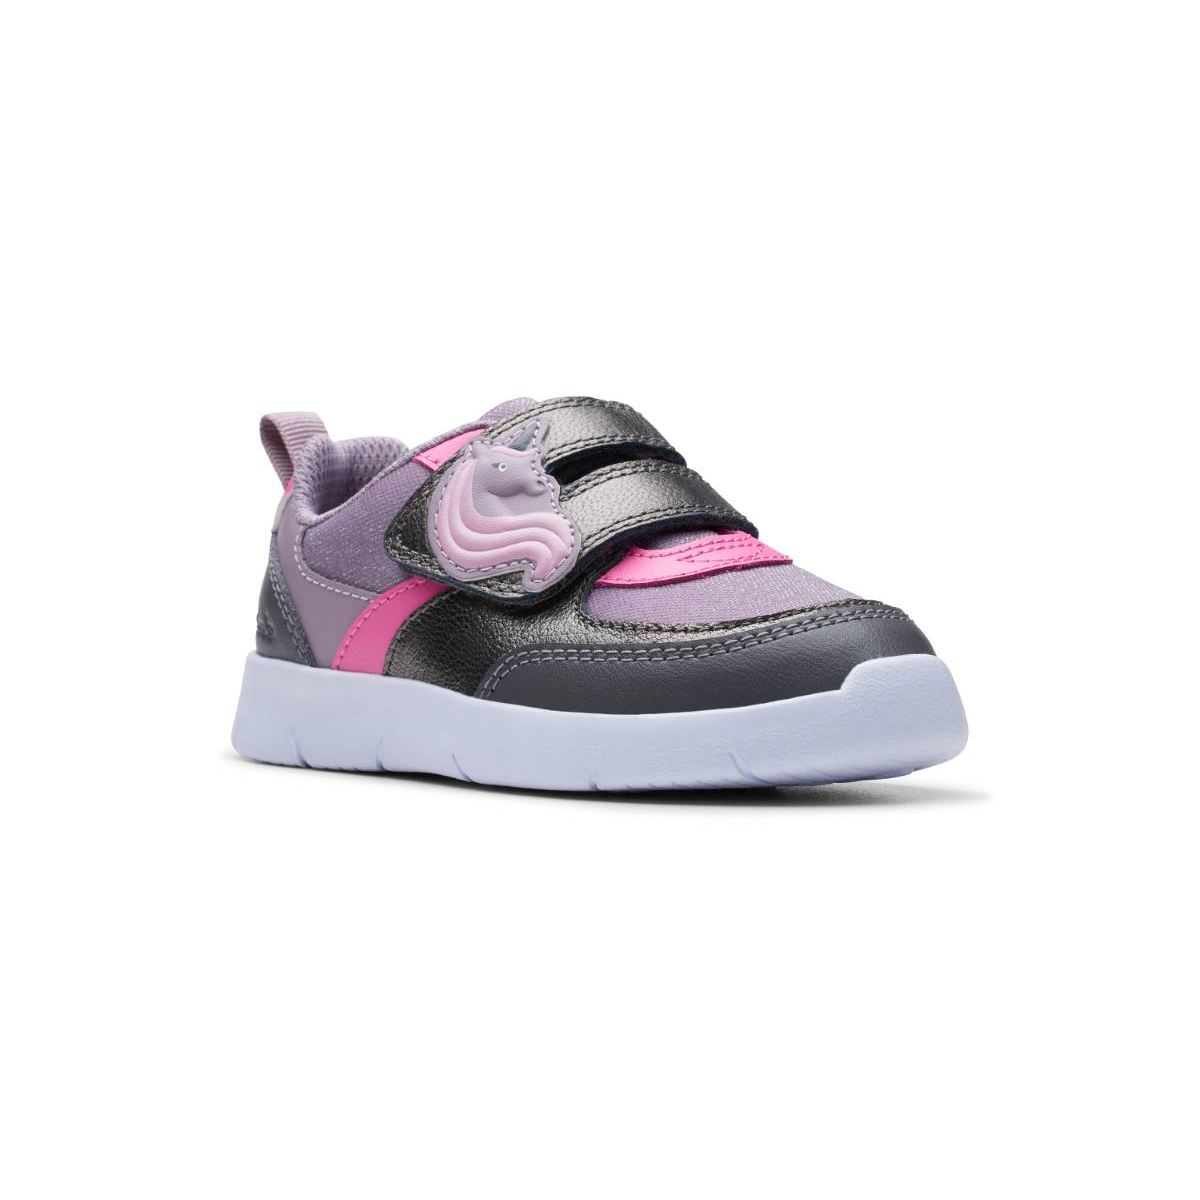 Clarks Ath Shimmer K Purple multi Kids toddler girls trainers 7645-77G in a Plain Leather in Size 7.5